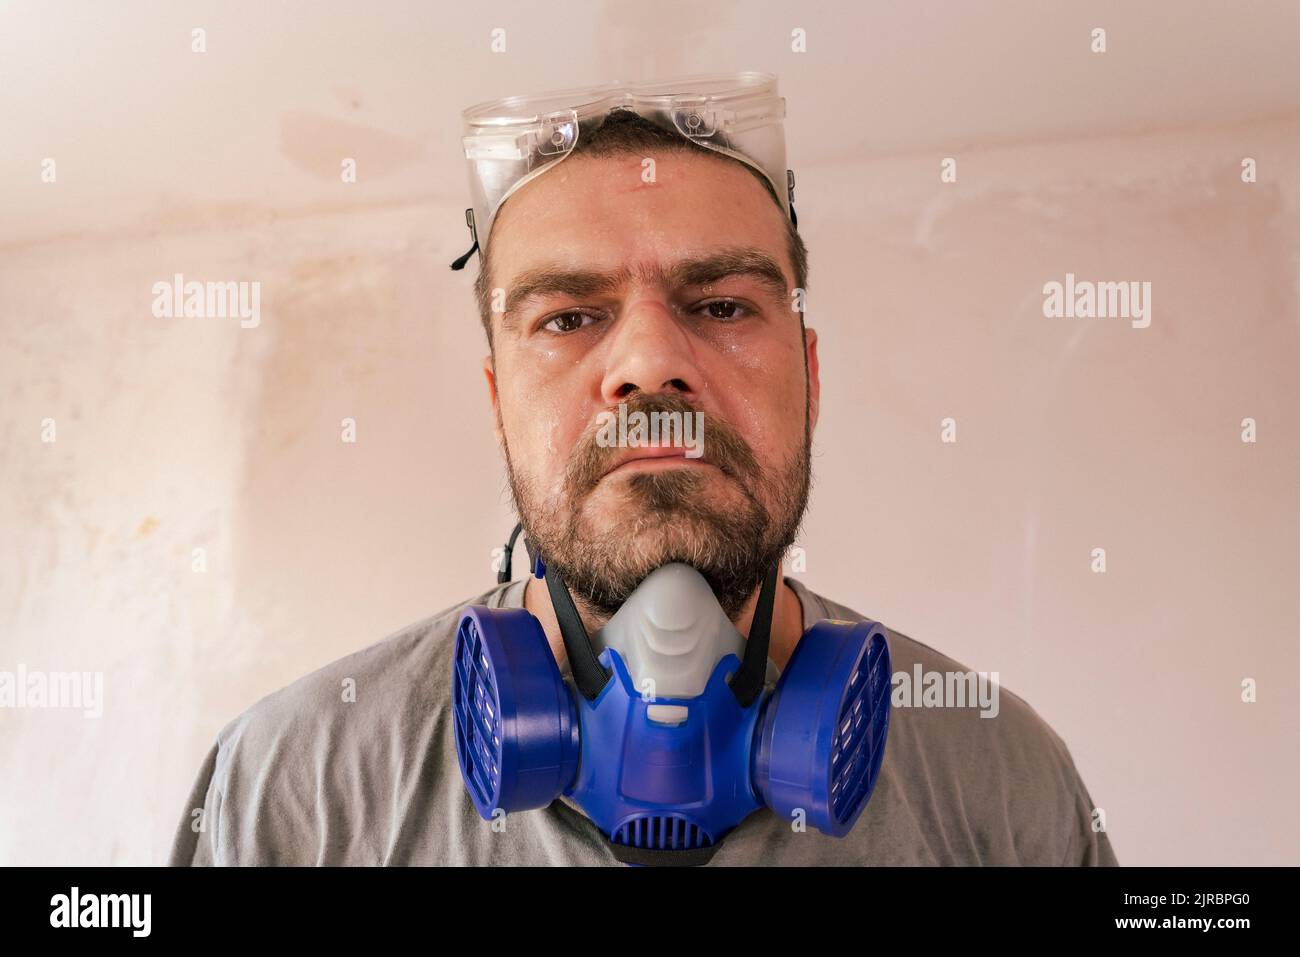 Selective focus shot of sweaty caucasian man with safety glasses and dust mask, looking directly into the lens seriously. Stock Photo